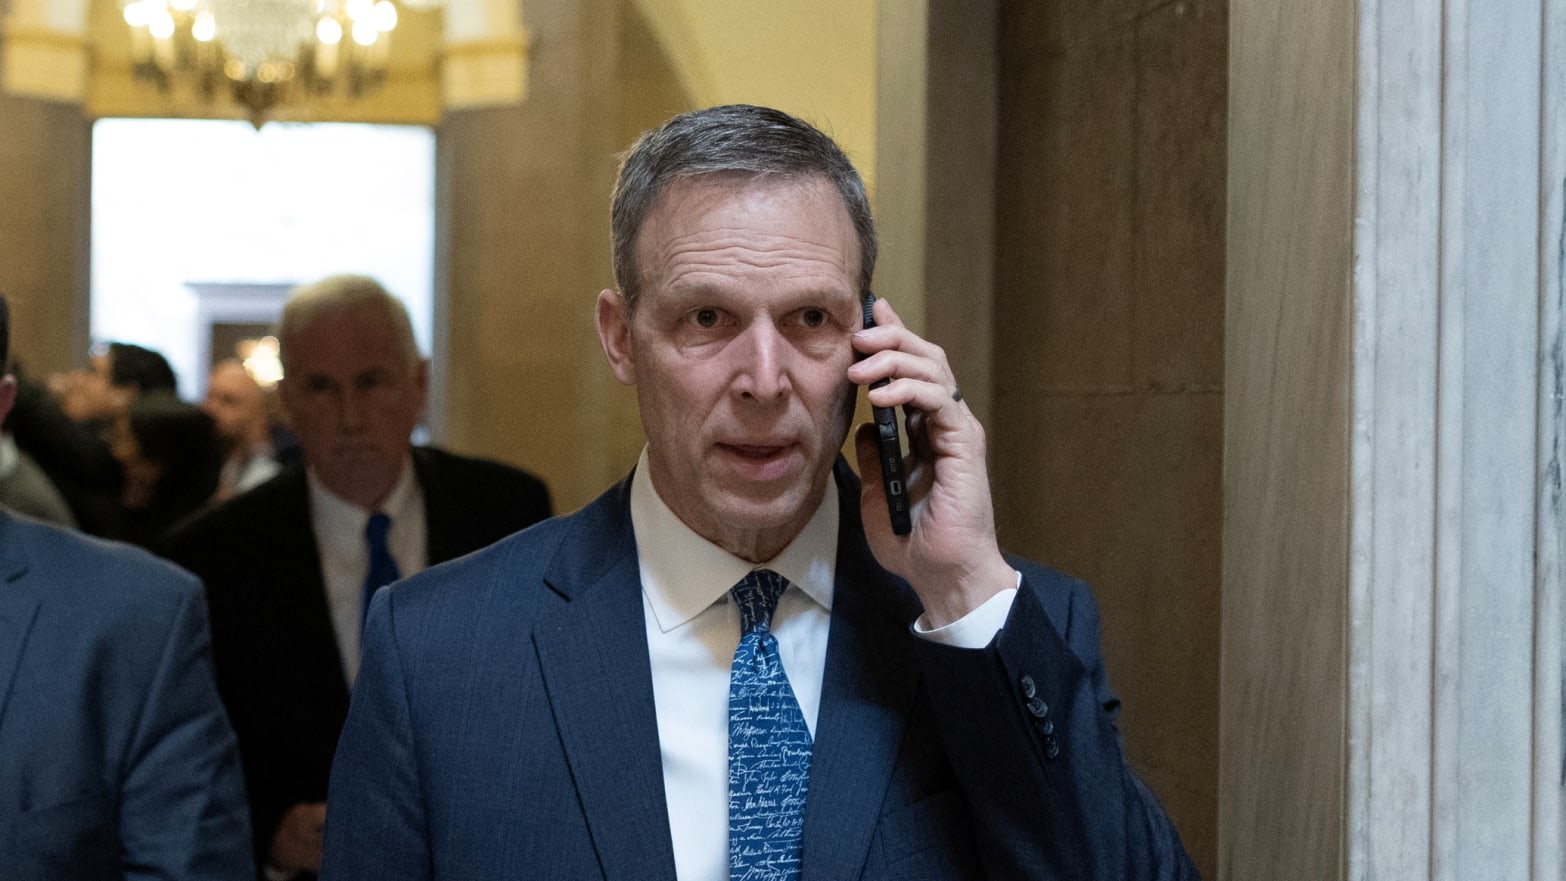 Rep. Scott Perry (R-PA) uses a cellphone while walking to the House Chamber on Capitol Hill in Washington, D.C., Feb. 2, 2023.